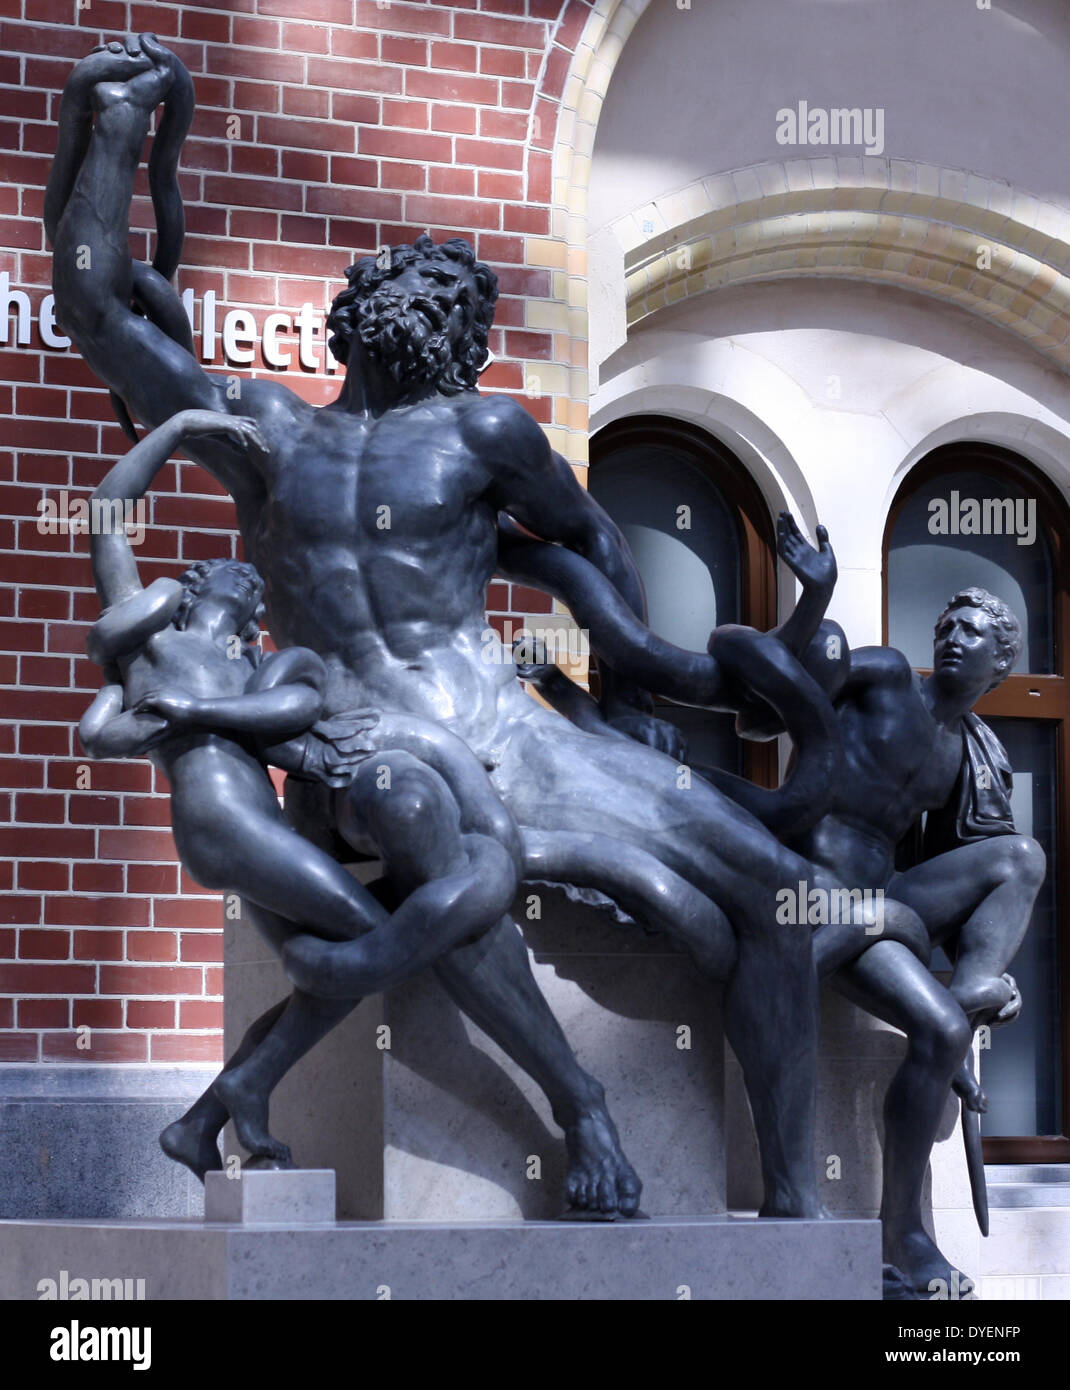 Bronze sculpture of laocoon by Francesco Righetti ( 1749-1819 ). Atrium courtyard of the Rijksmuseum, Amsterdam, Netherlands. Laocoon was a Trojan priest of Poseidon, whose rules he defied, either by marrying and having sons. He was subsequently subject to divine execution by two serpents. Stock Photo